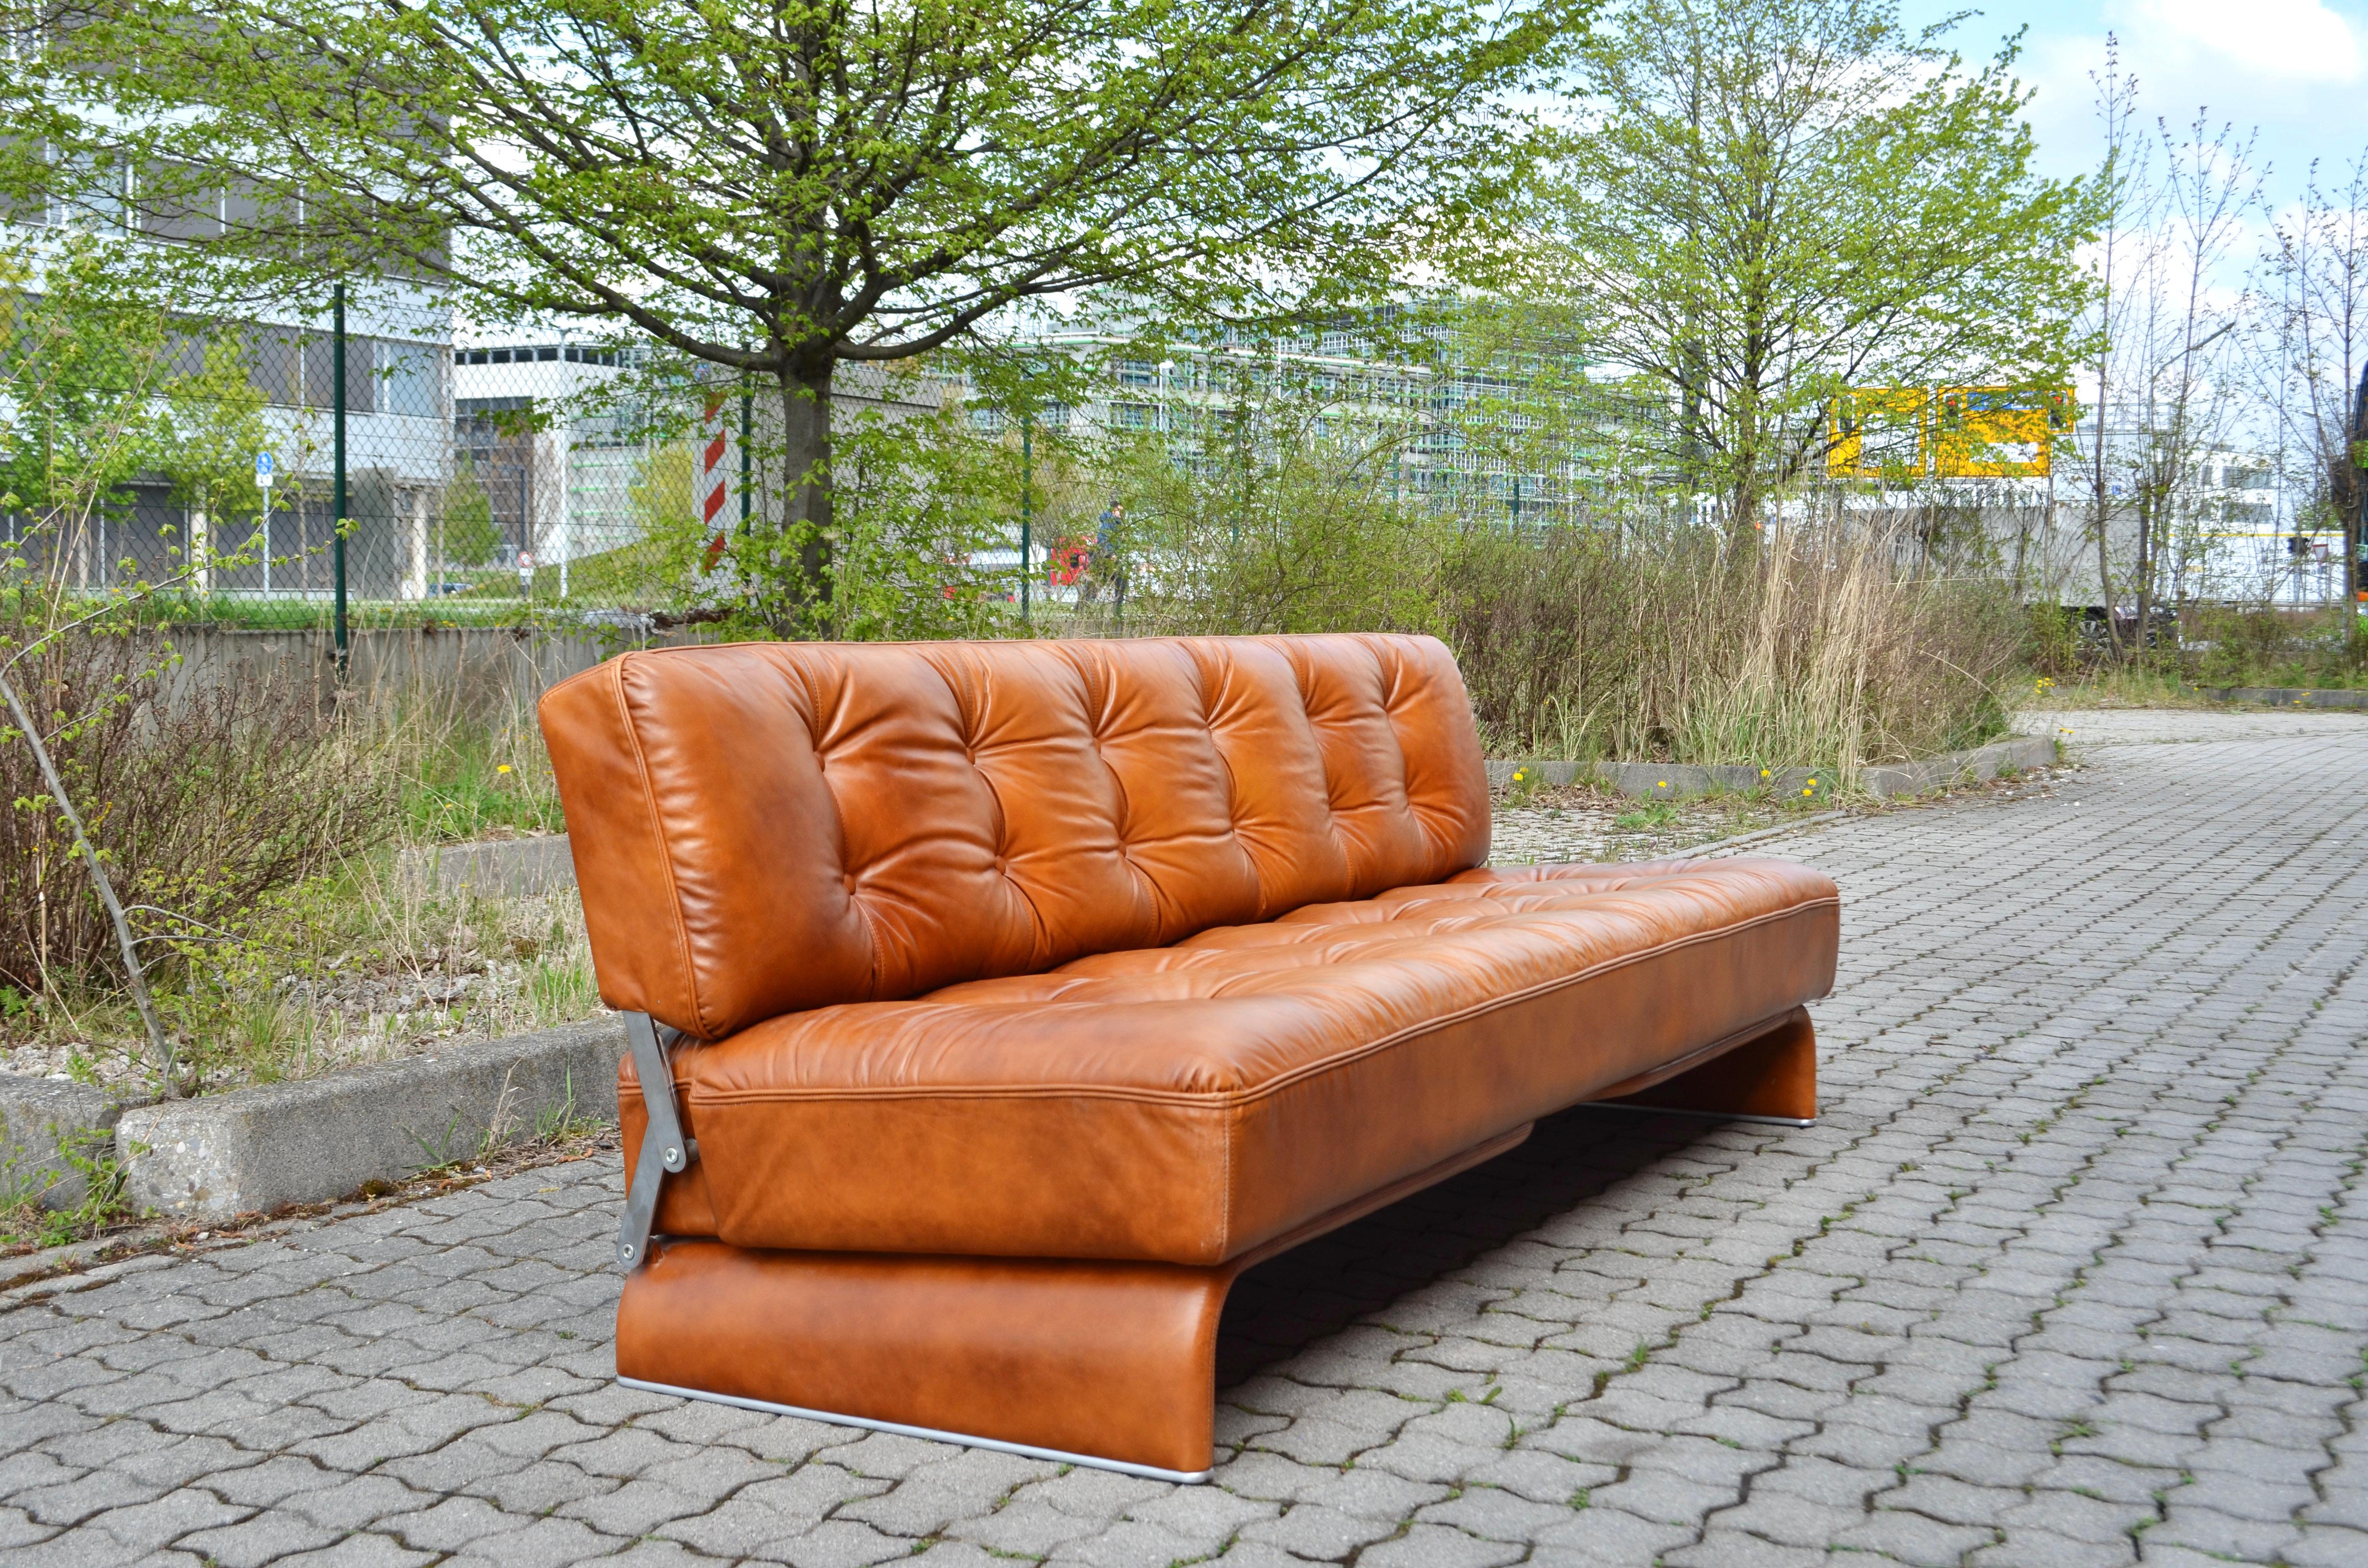 20th Century Johannes Spalt Cognac Daybed Leather Sofa Constanze by Wittmann